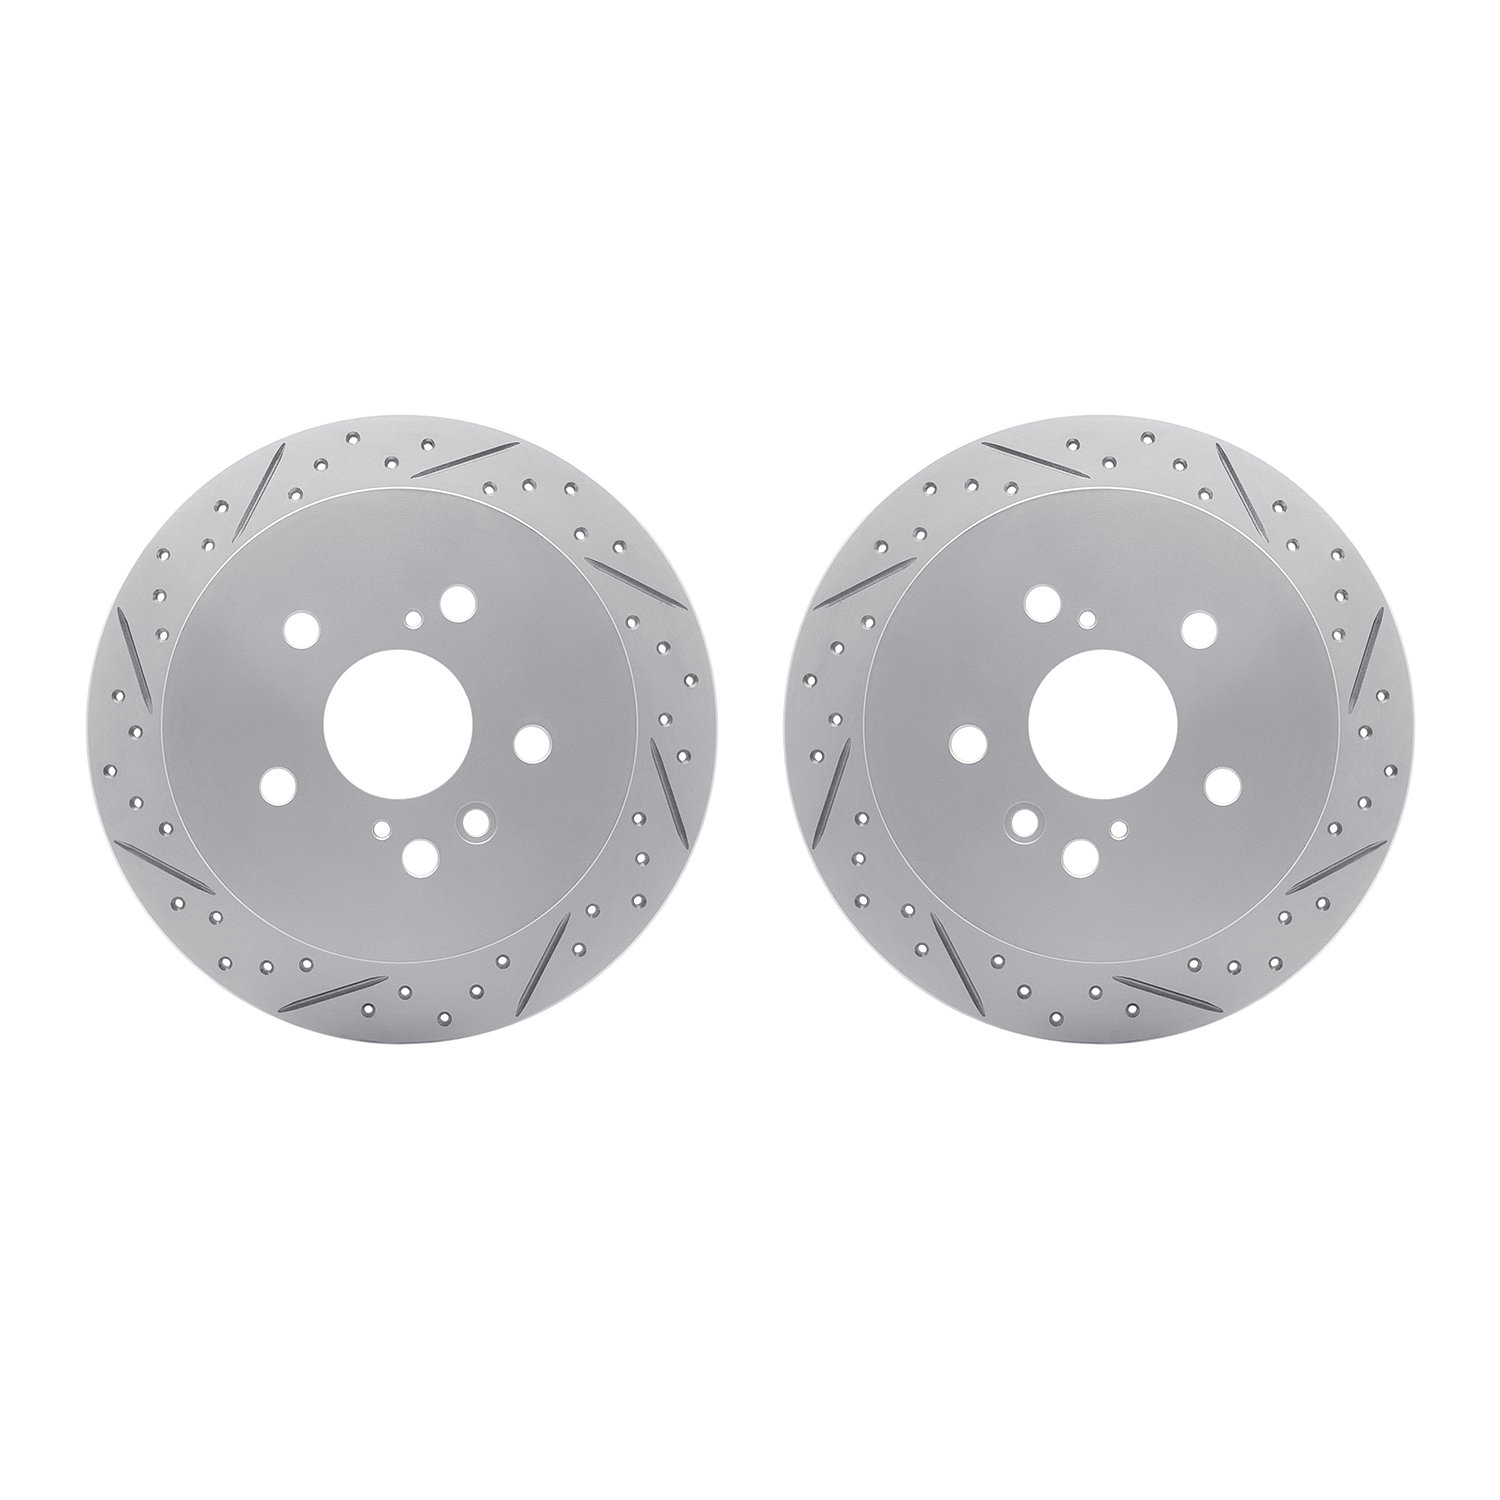 2002-76051 Geoperformance Drilled/Slotted Brake Rotors, 2004-2009 Lexus/Toyota/Scion, Position: Rear